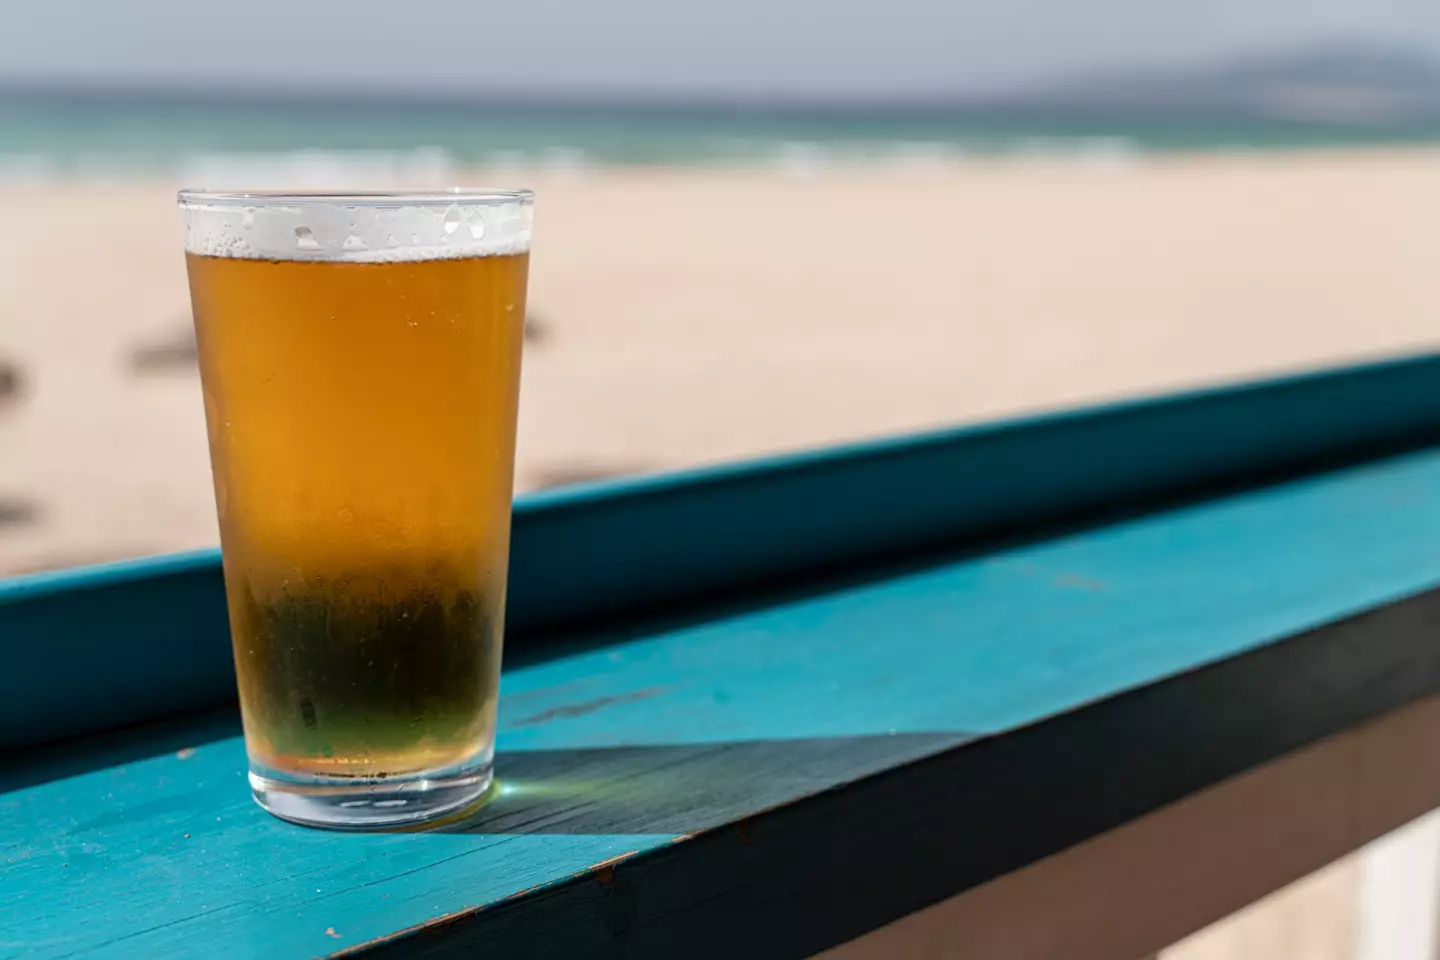 Pints as cheap as 84p? Tanzania might be the holiday destination for you.